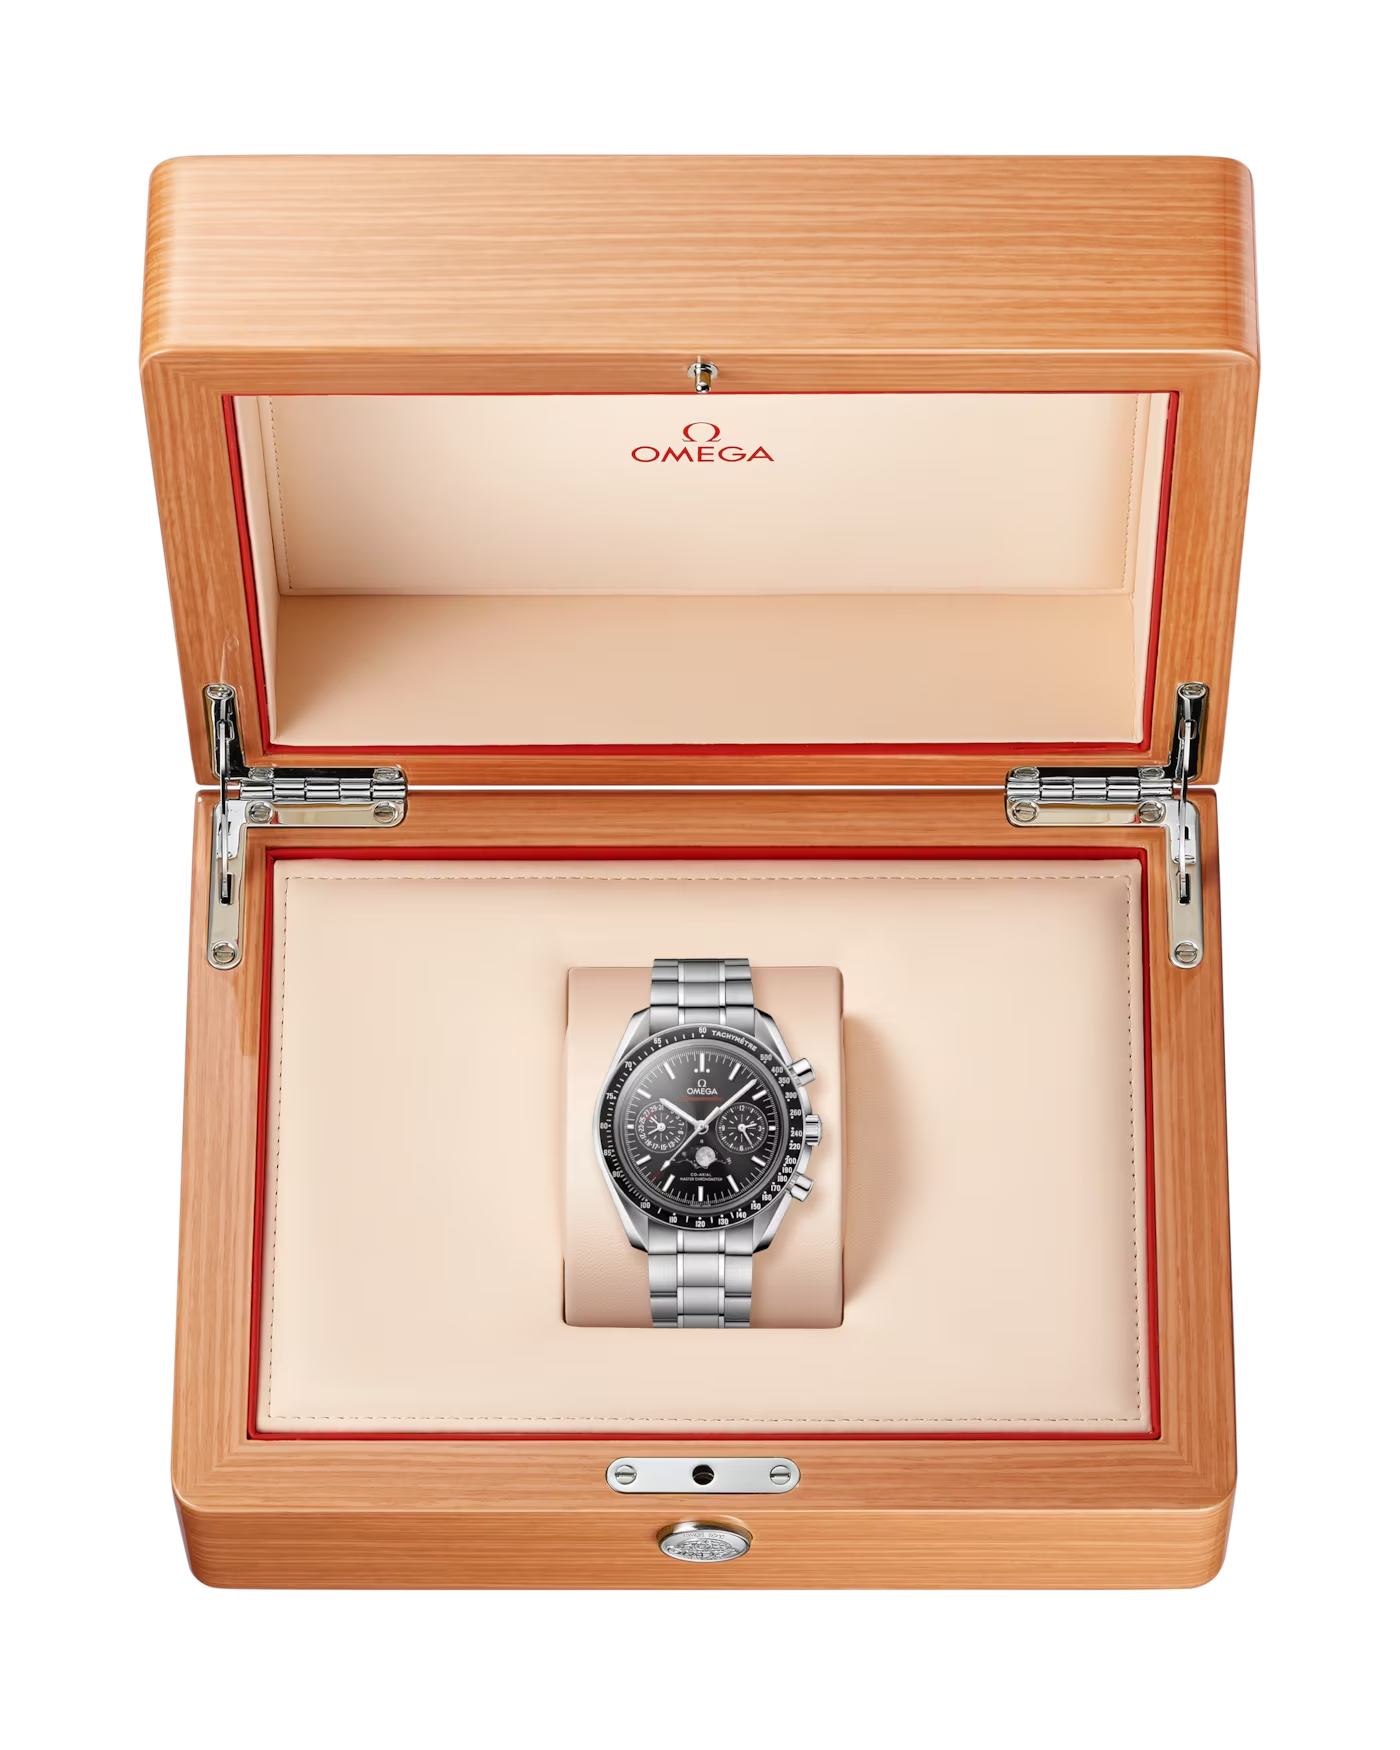 OMEGA-SPEEDMASTER MOONPHASE CO‑AXIAL MASTER CHRONOMETER MOONPHASE CHRONOGRAPH 44.25 MM 304.30.44.52.01.001